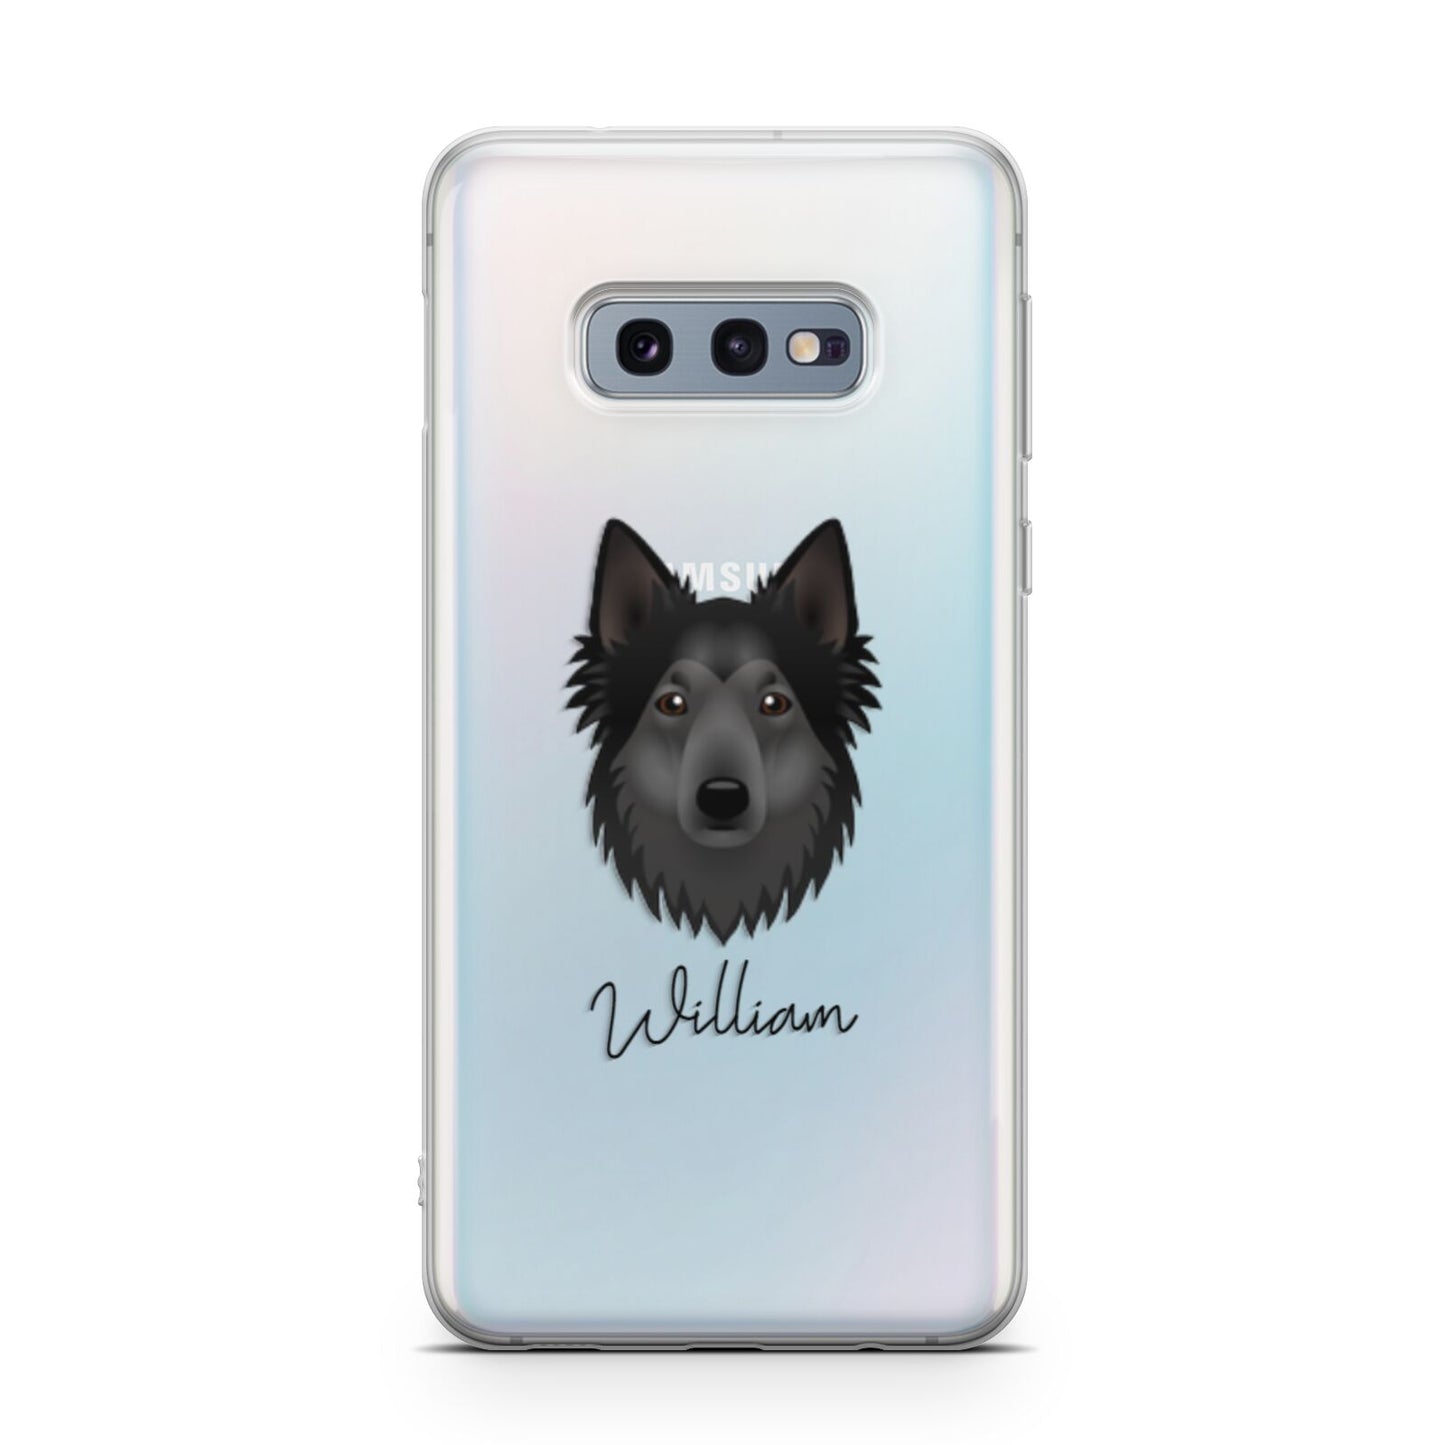 Shollie Personalised Samsung Galaxy S10E Case